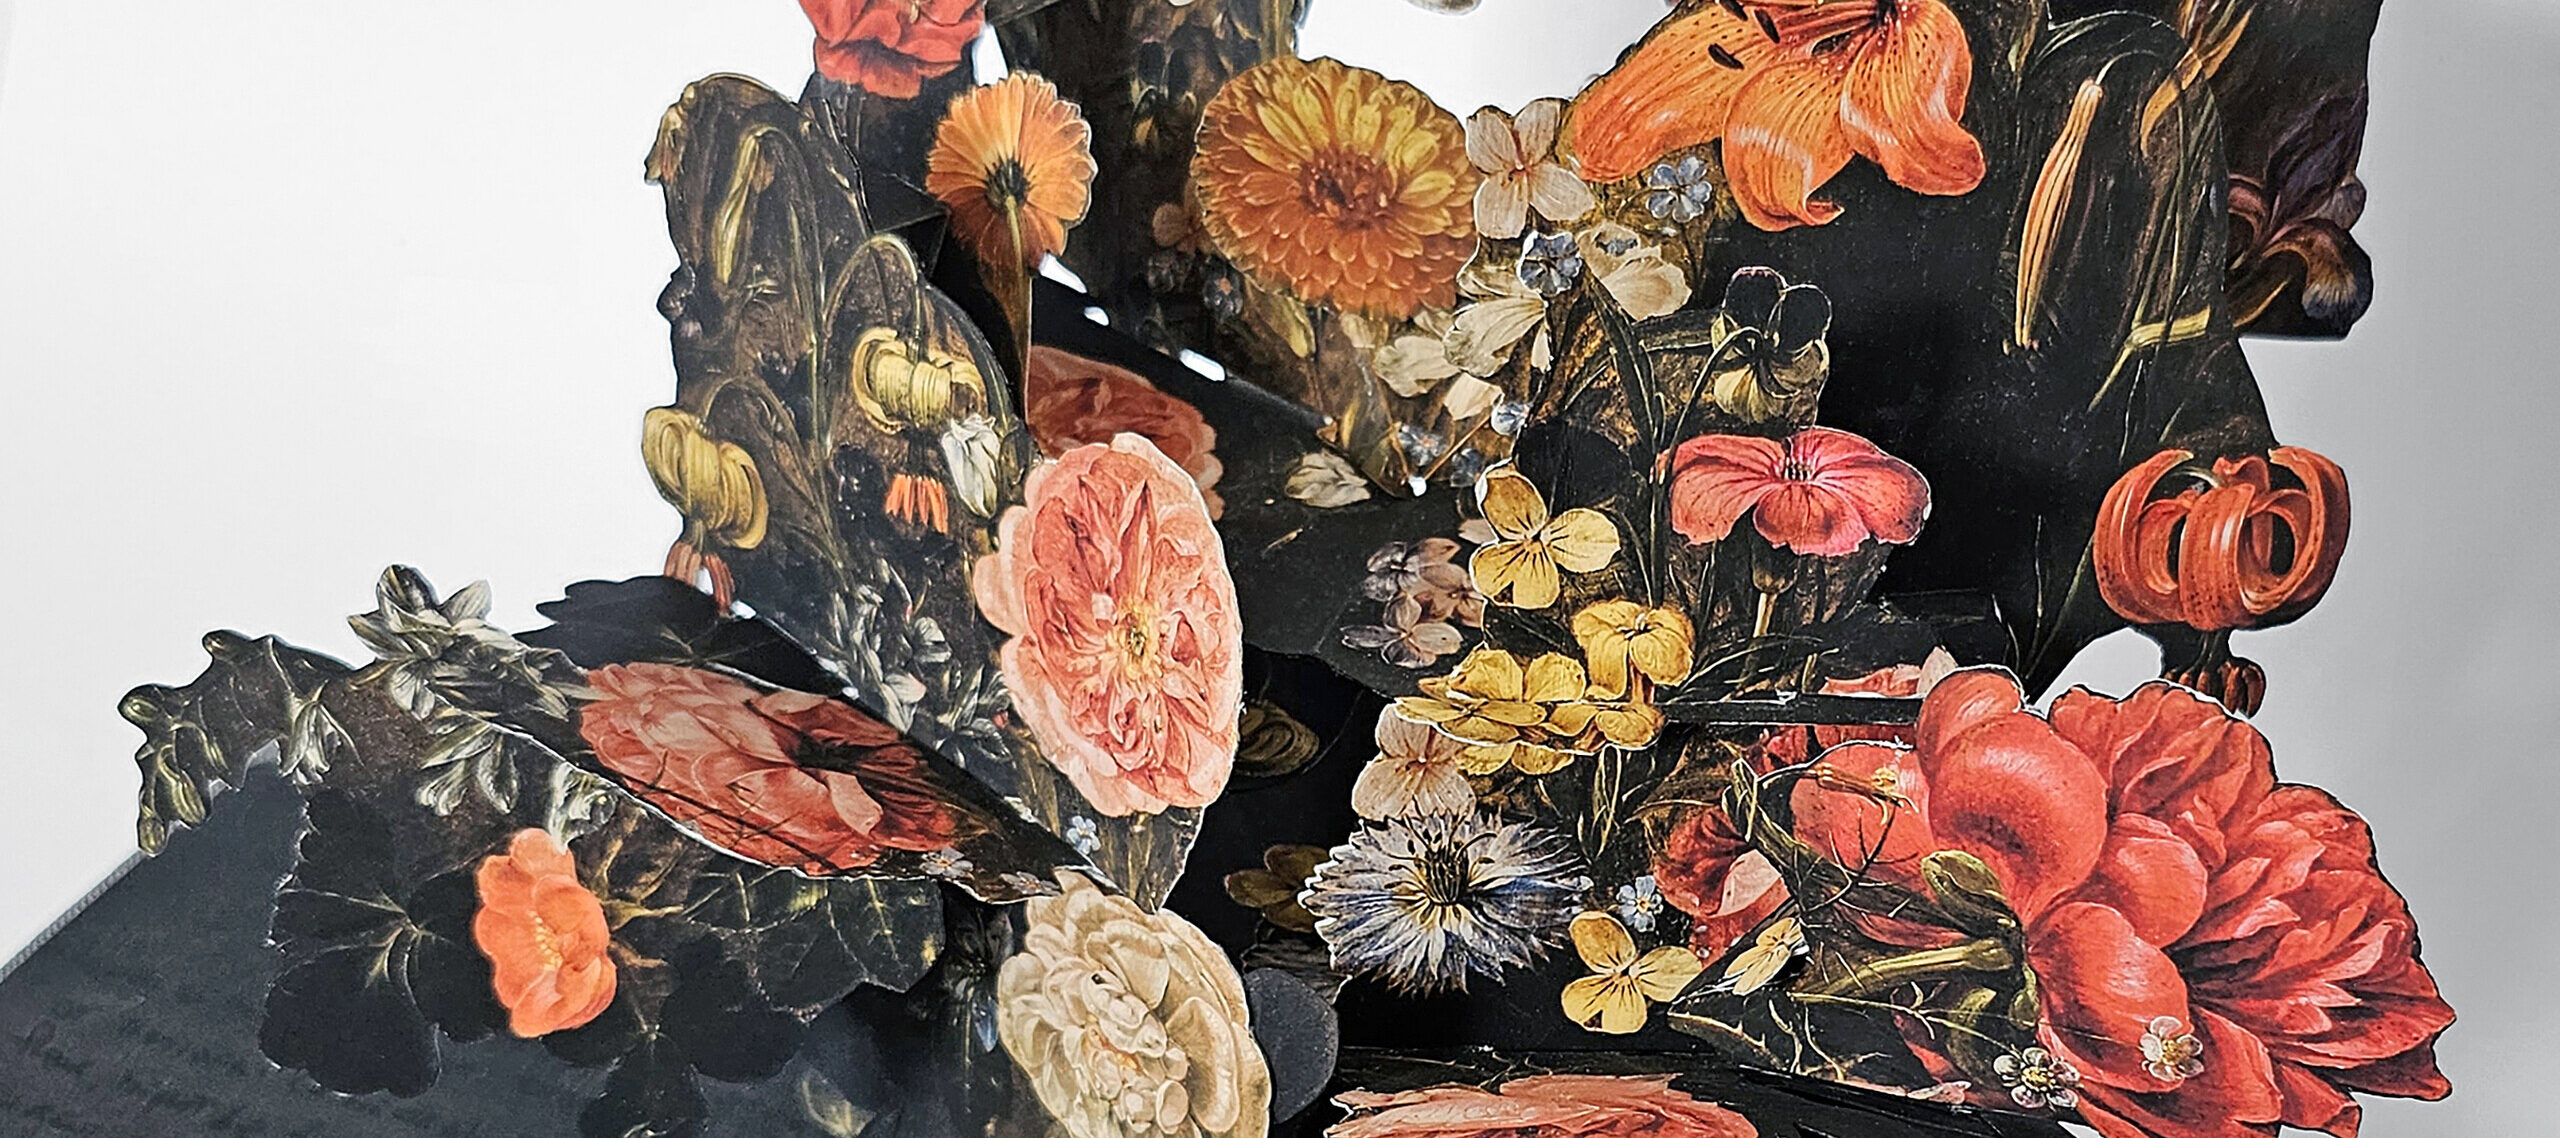 An artist's book, opened to reveal a pop-up of many colorful flowers in a vase. The pages are dark with black writing.